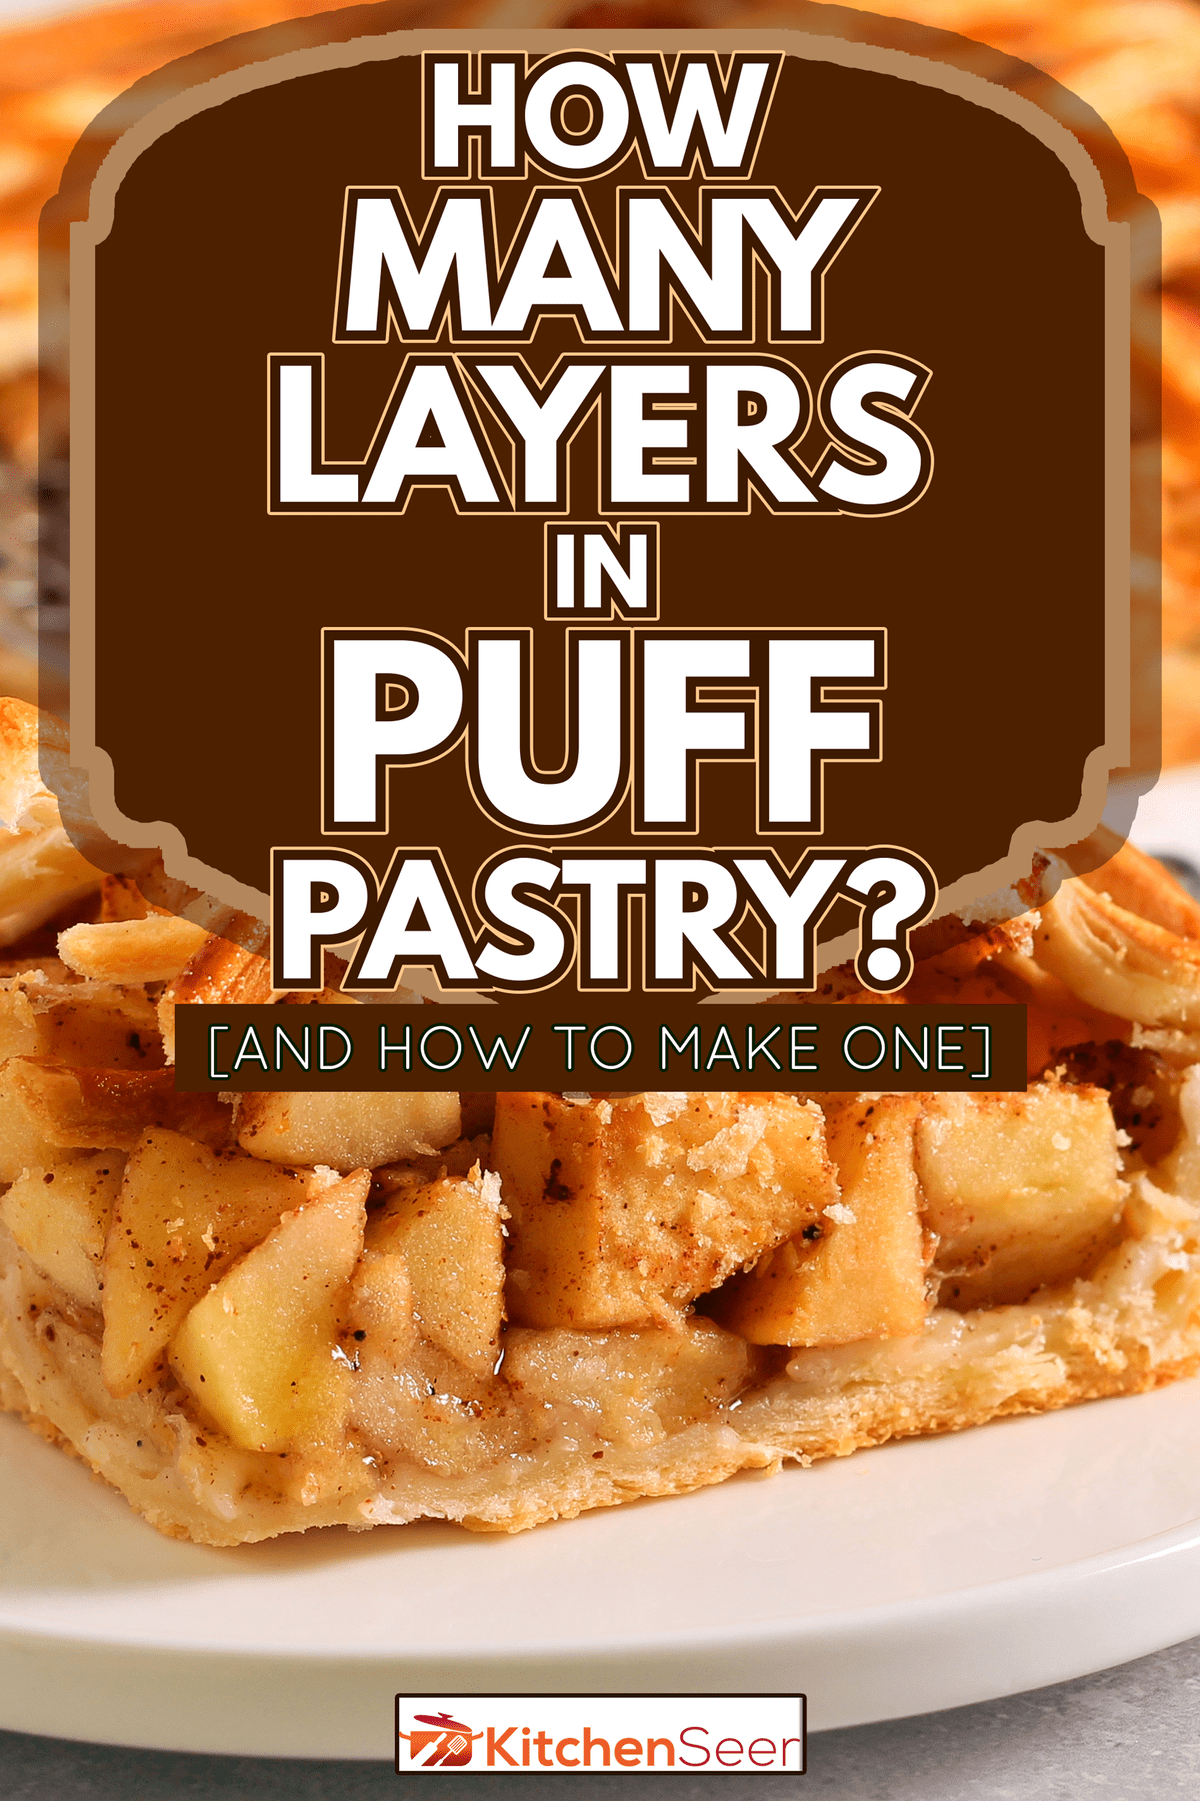 Cinnamon and apple lattice puff pastry cake - How Many Layers In Puff [And How To Make One]